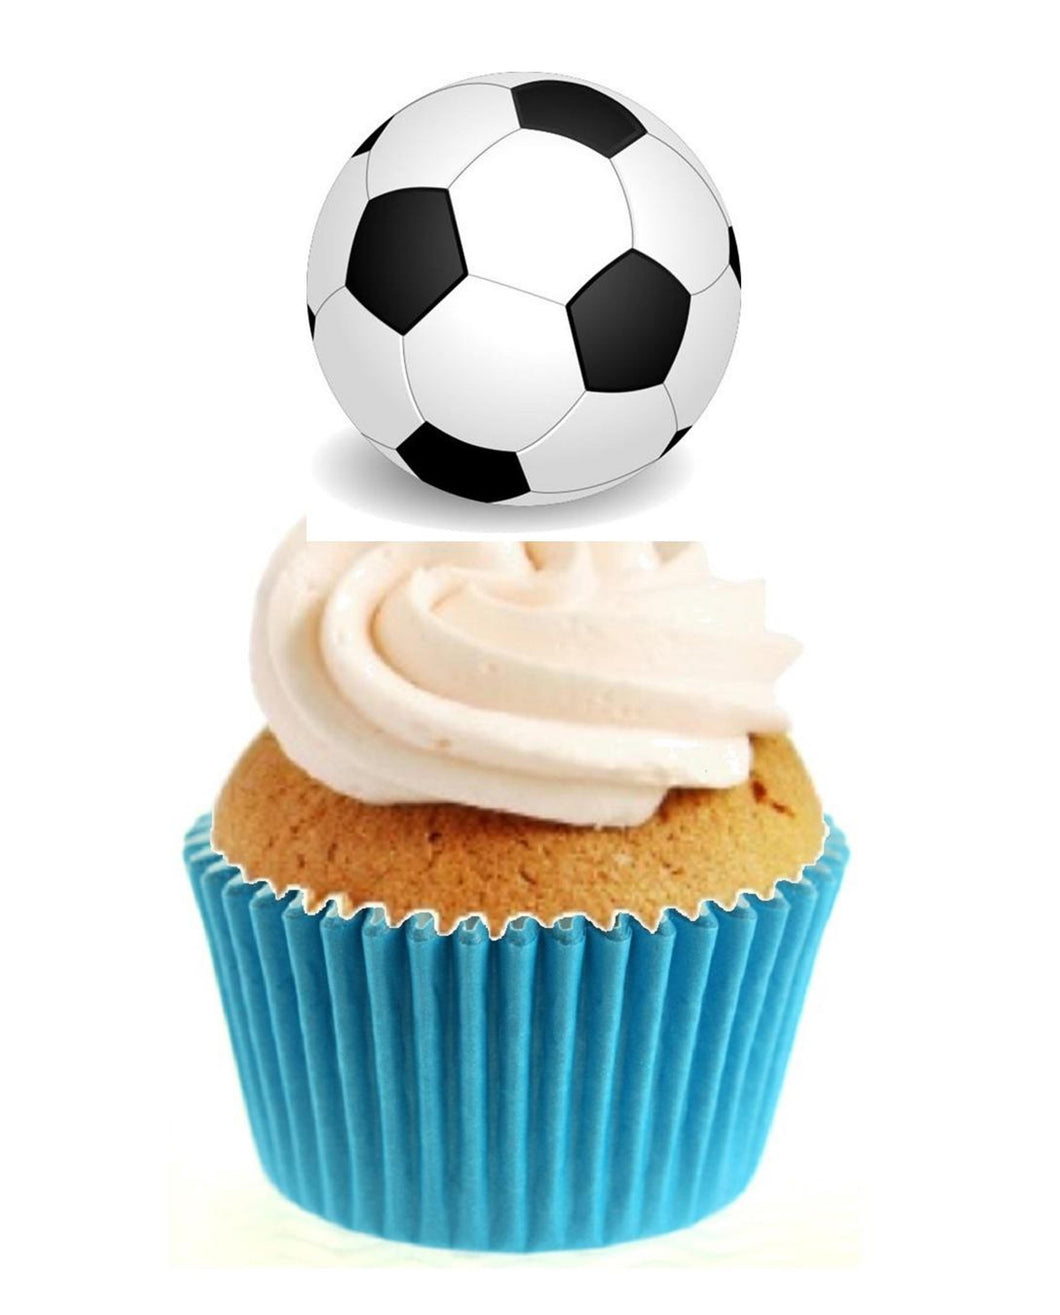 Football Stand Up Cake Toppers (12 pack)  Pack contains 12 images printed onto premium wafer card